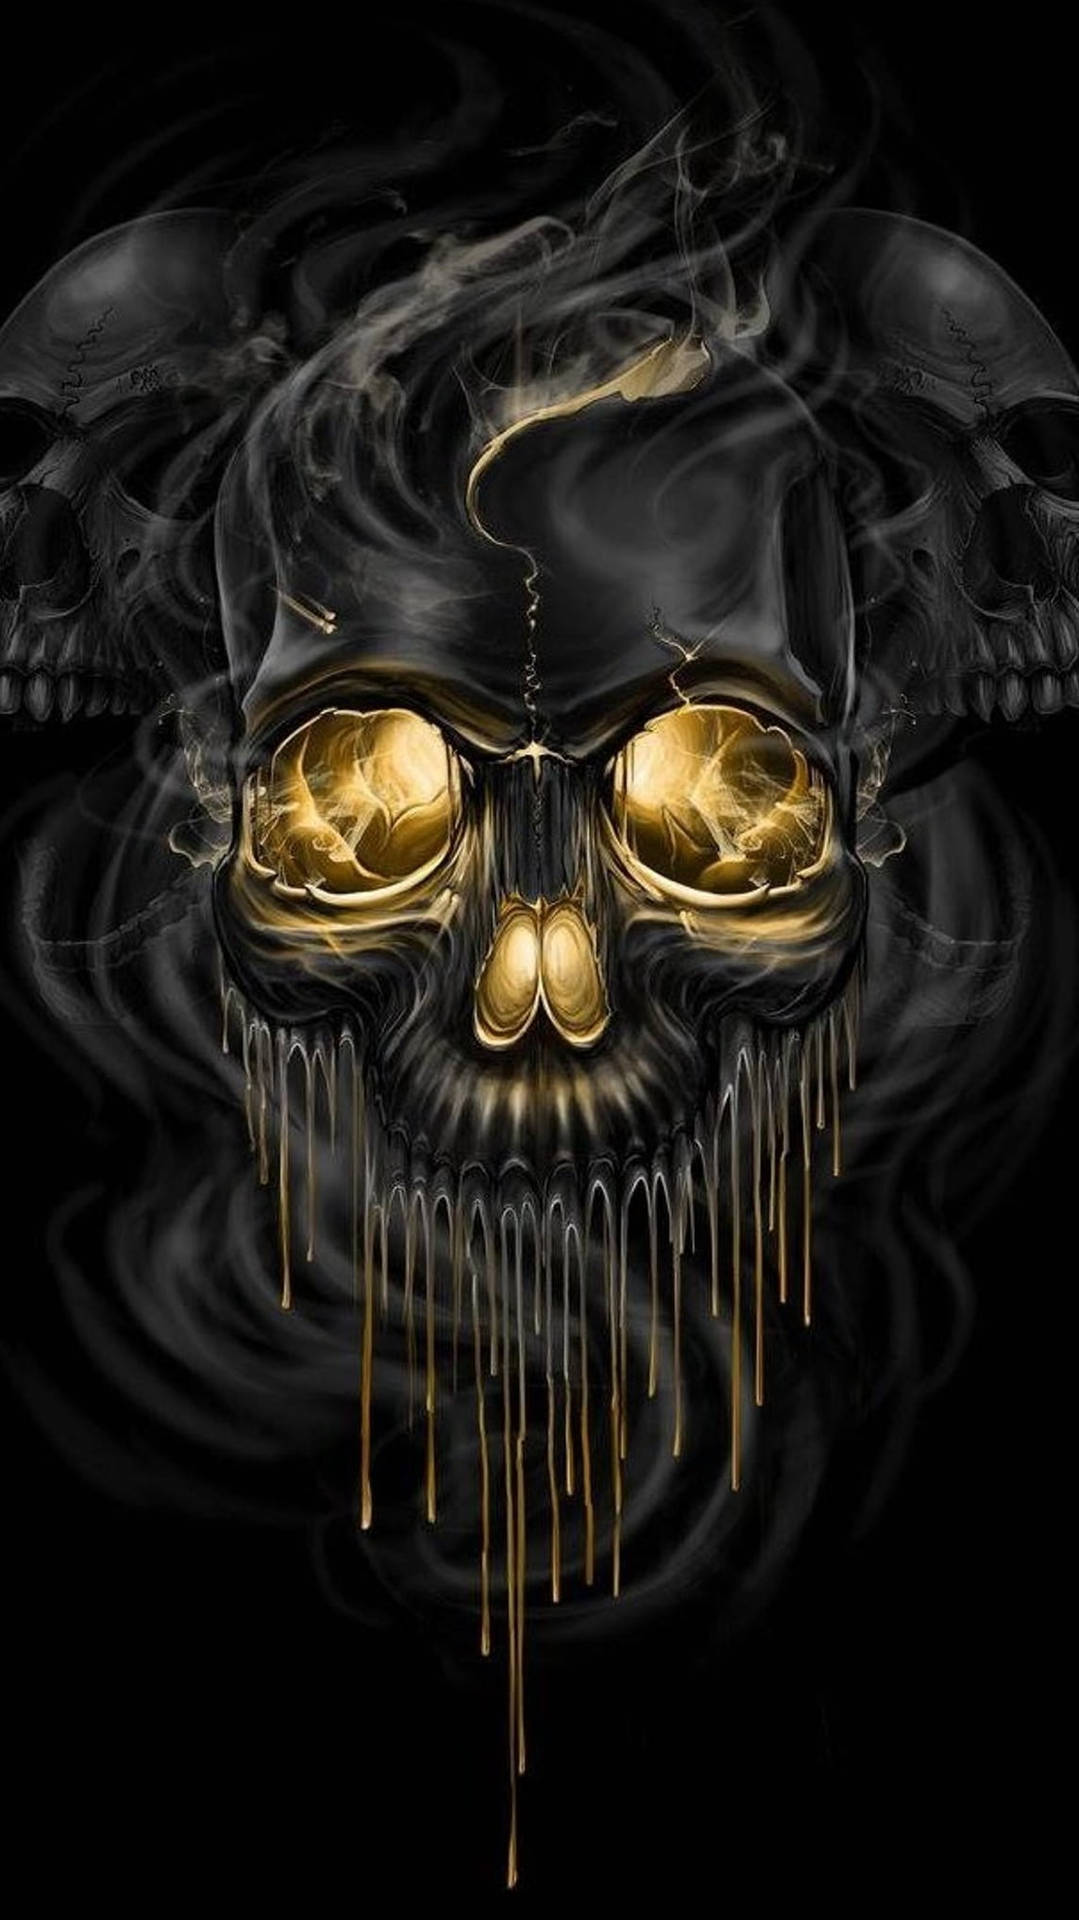 Black And Gold Dripping Gangster Skull Wallpaper